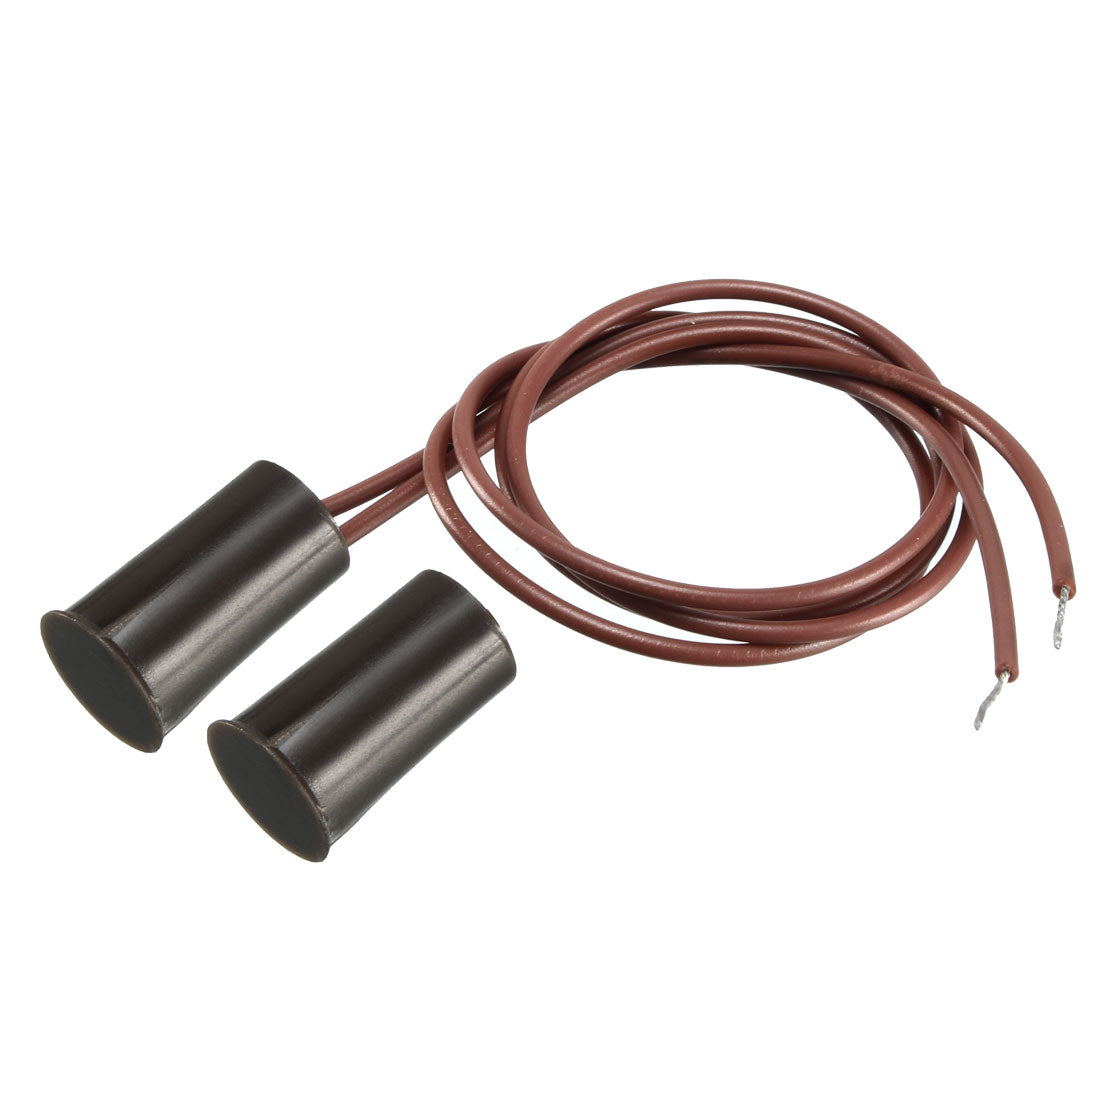 uxcell Uxcell 2pcs RC-33 NC Recessed Wired Security Window Door Contact Sensor Alarm Magnetic Reed Switch Brown